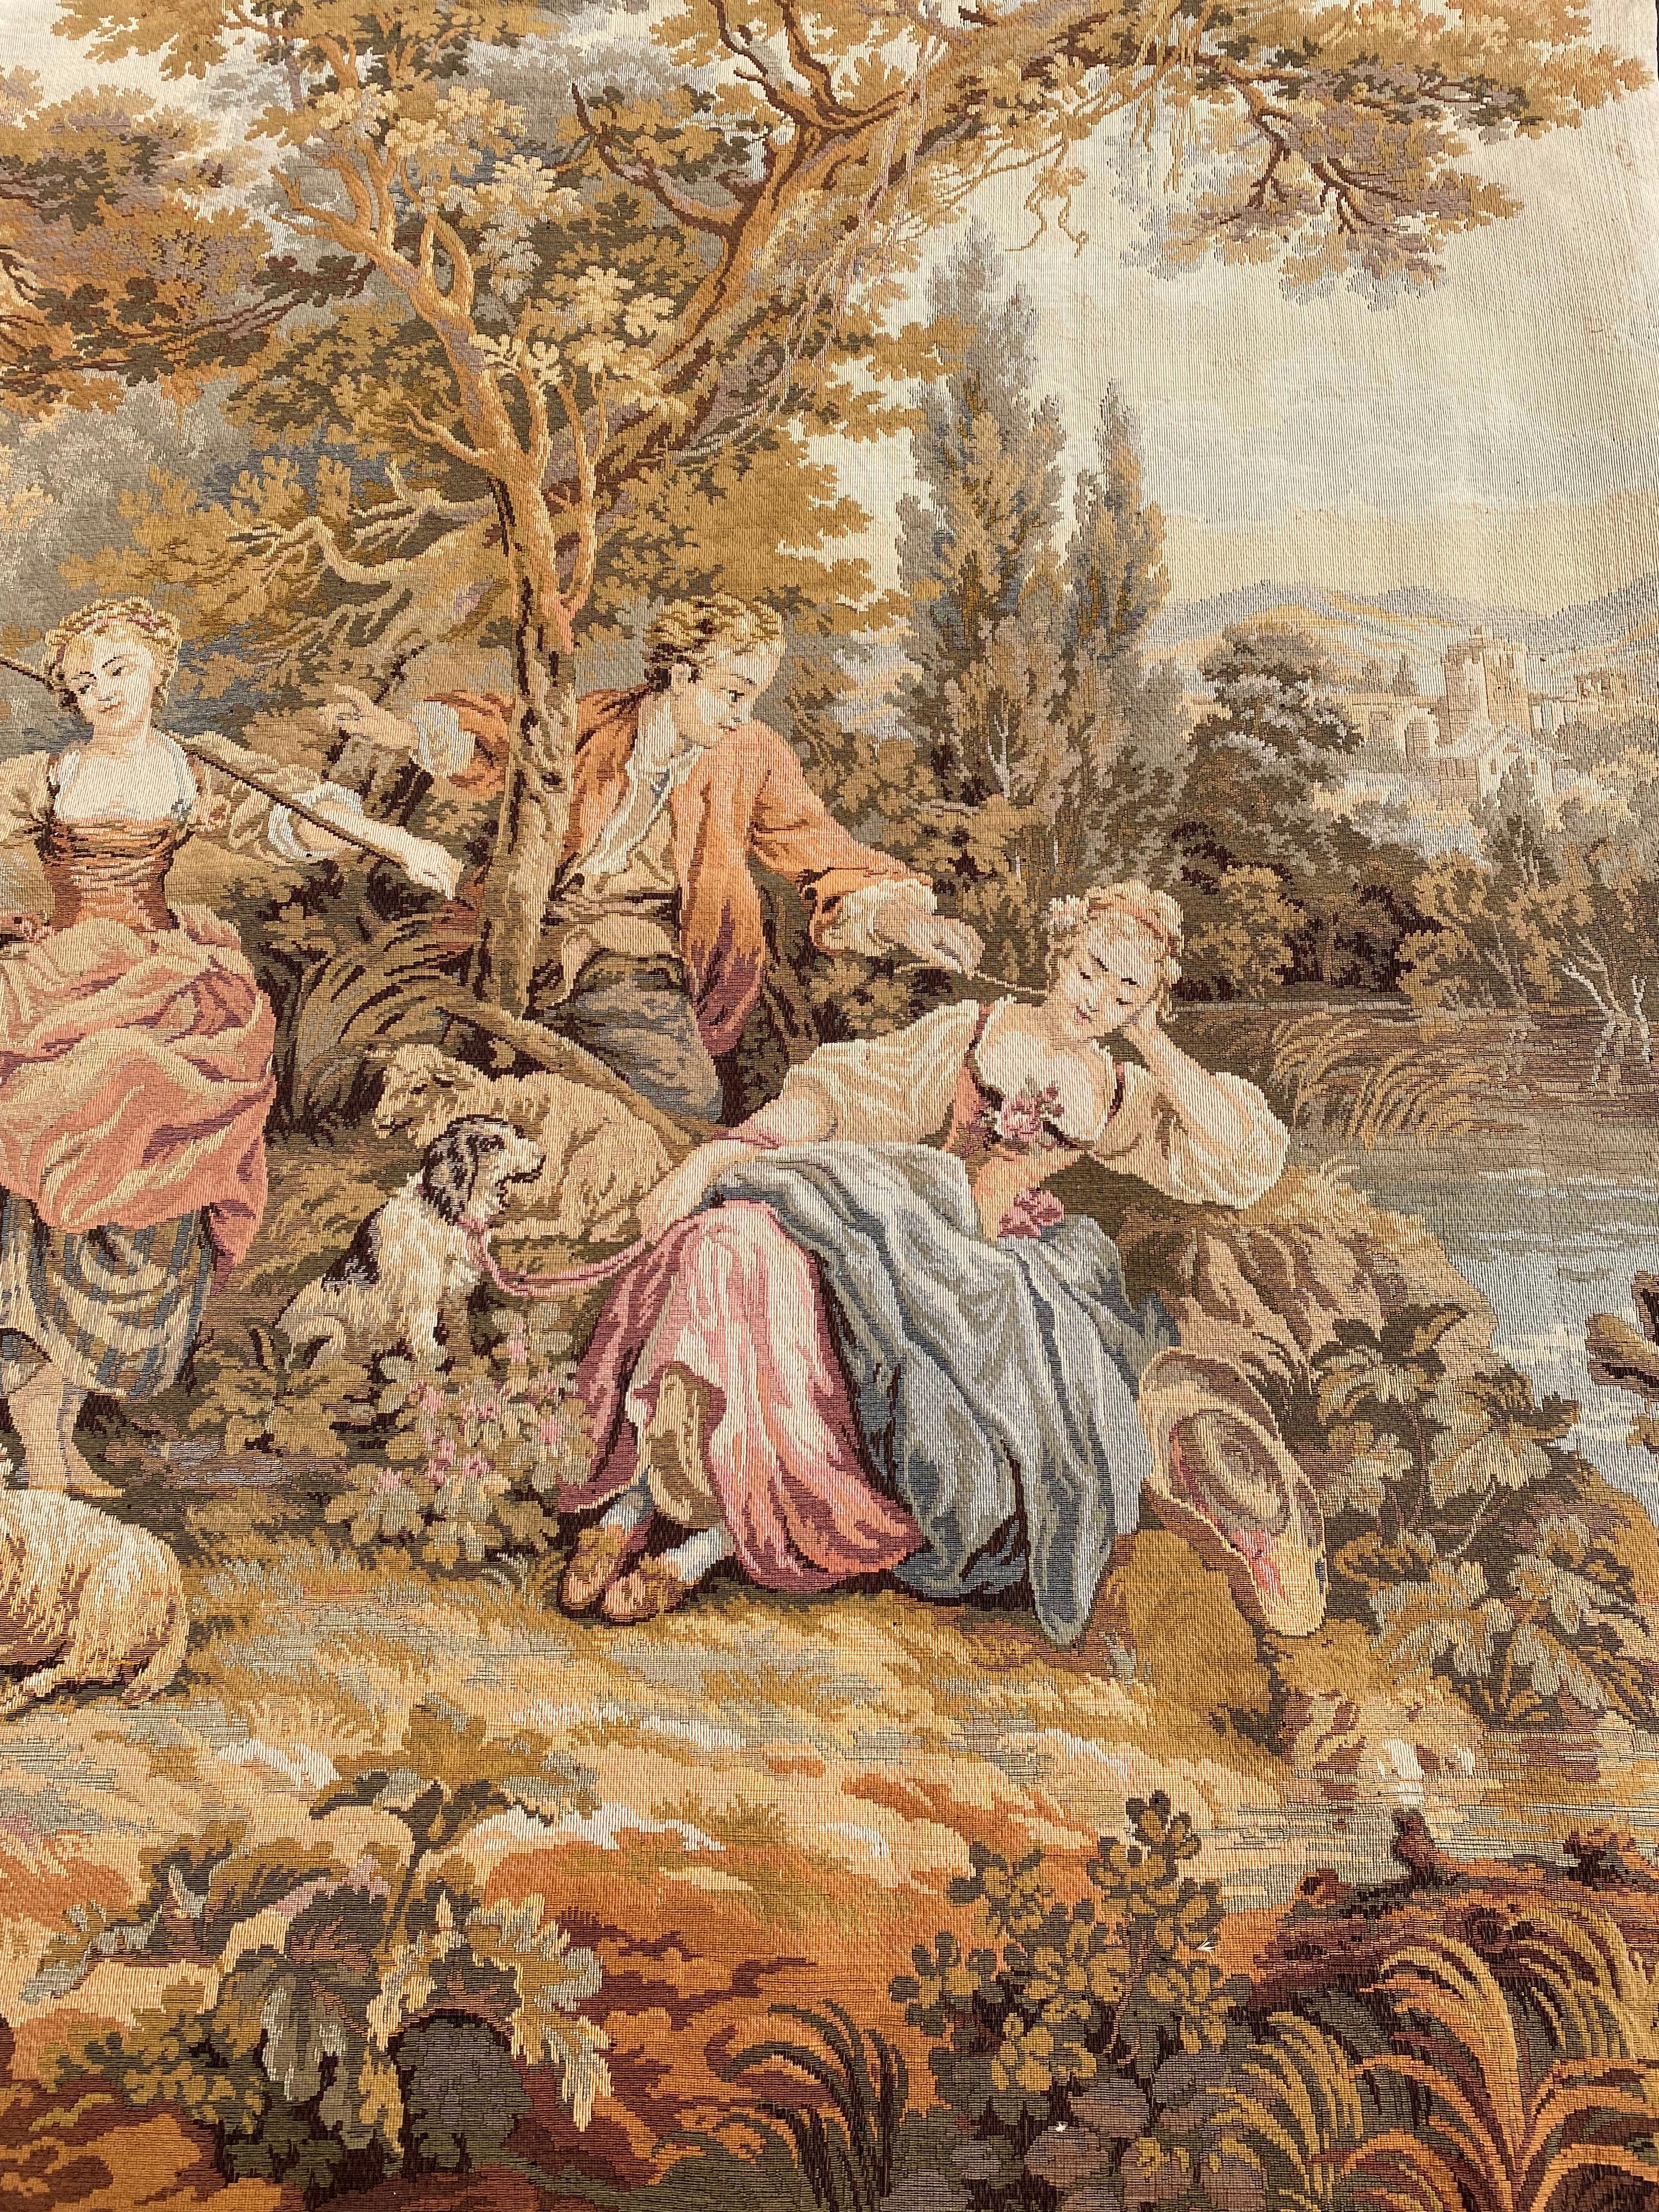 Introducing a magnificent 20th-century tapestry that captures the essence of the gentle joys of life, festivities, music, and above all, love. Set against a rustic backdrop, shepherds and shepherdesses embrace amid a serene landscape with a few